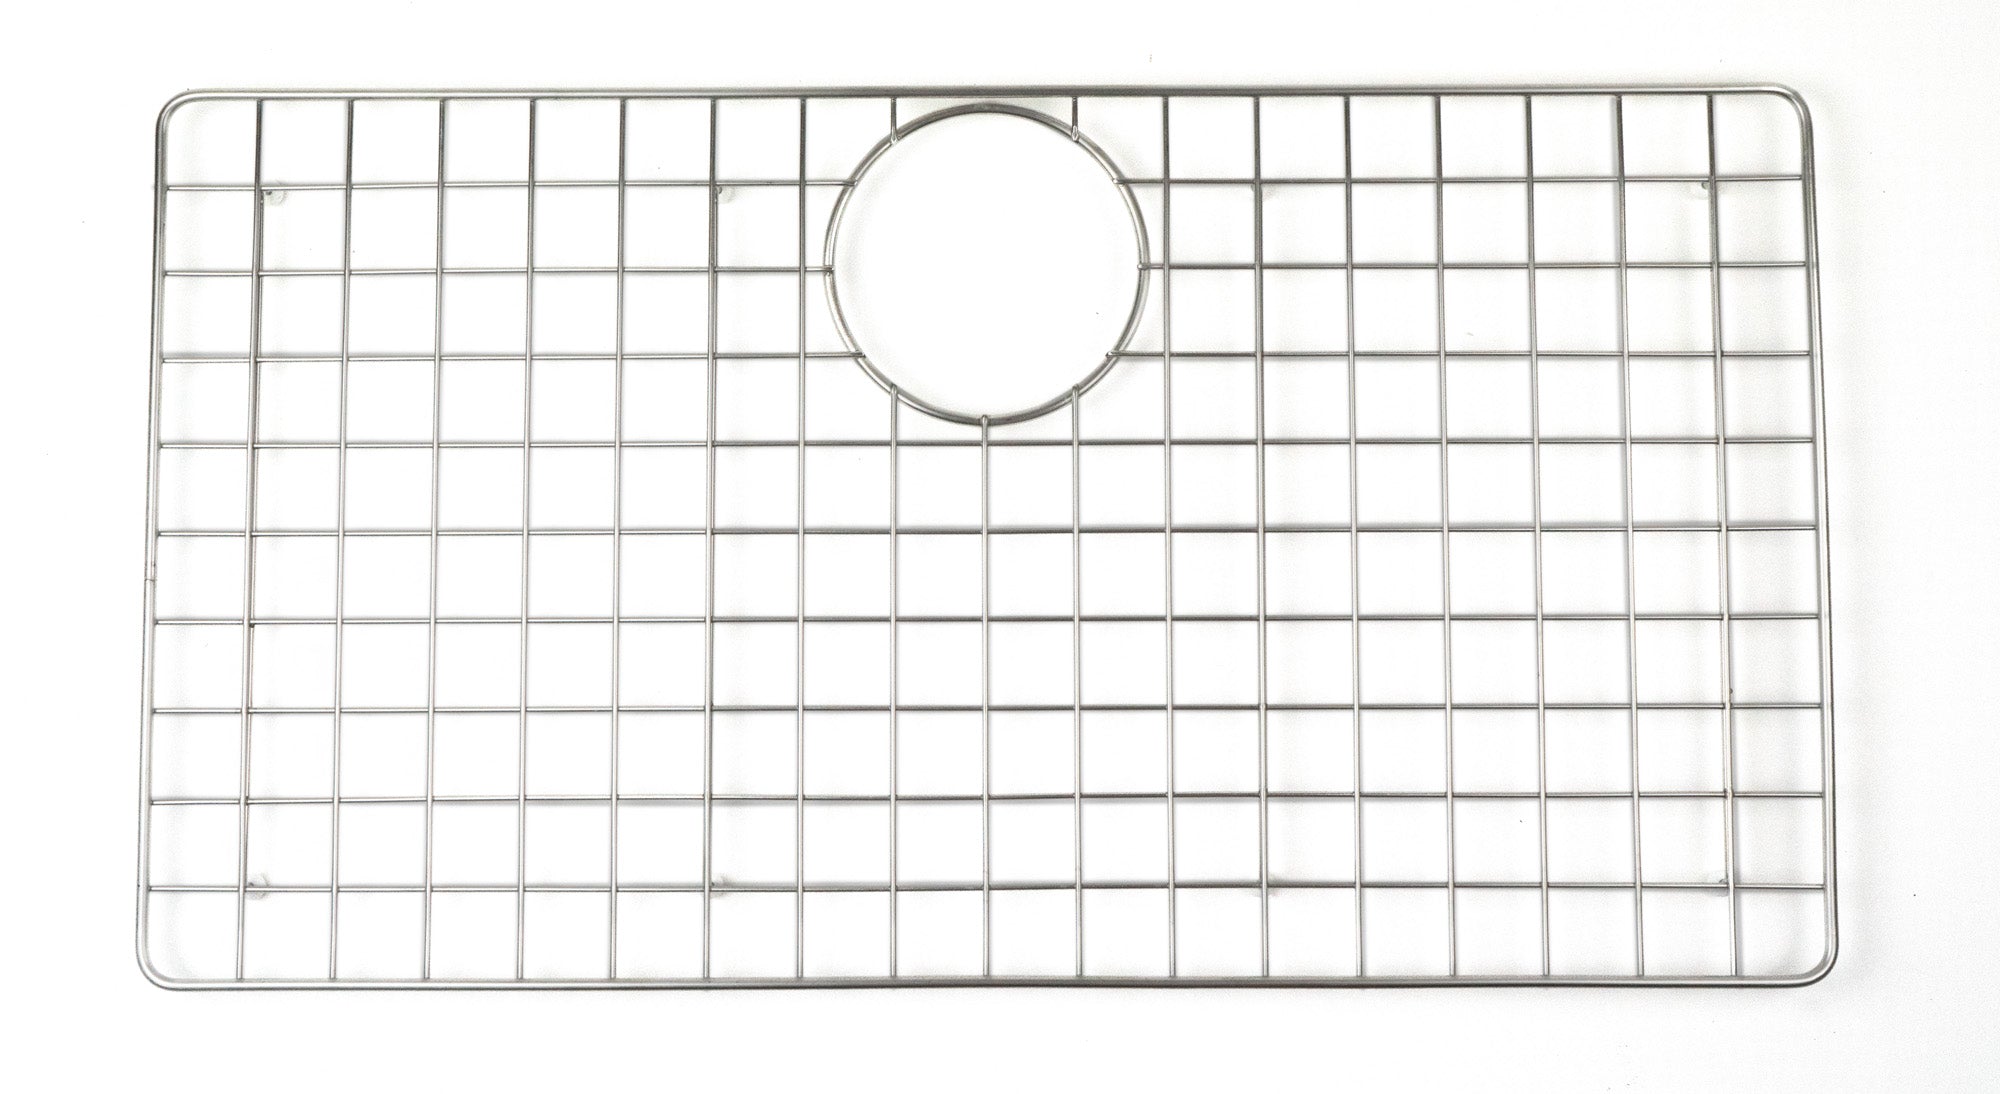 ALFI Brand - Stainless Steel Grid for AB3020DI and AB3020UM | ABGR3020